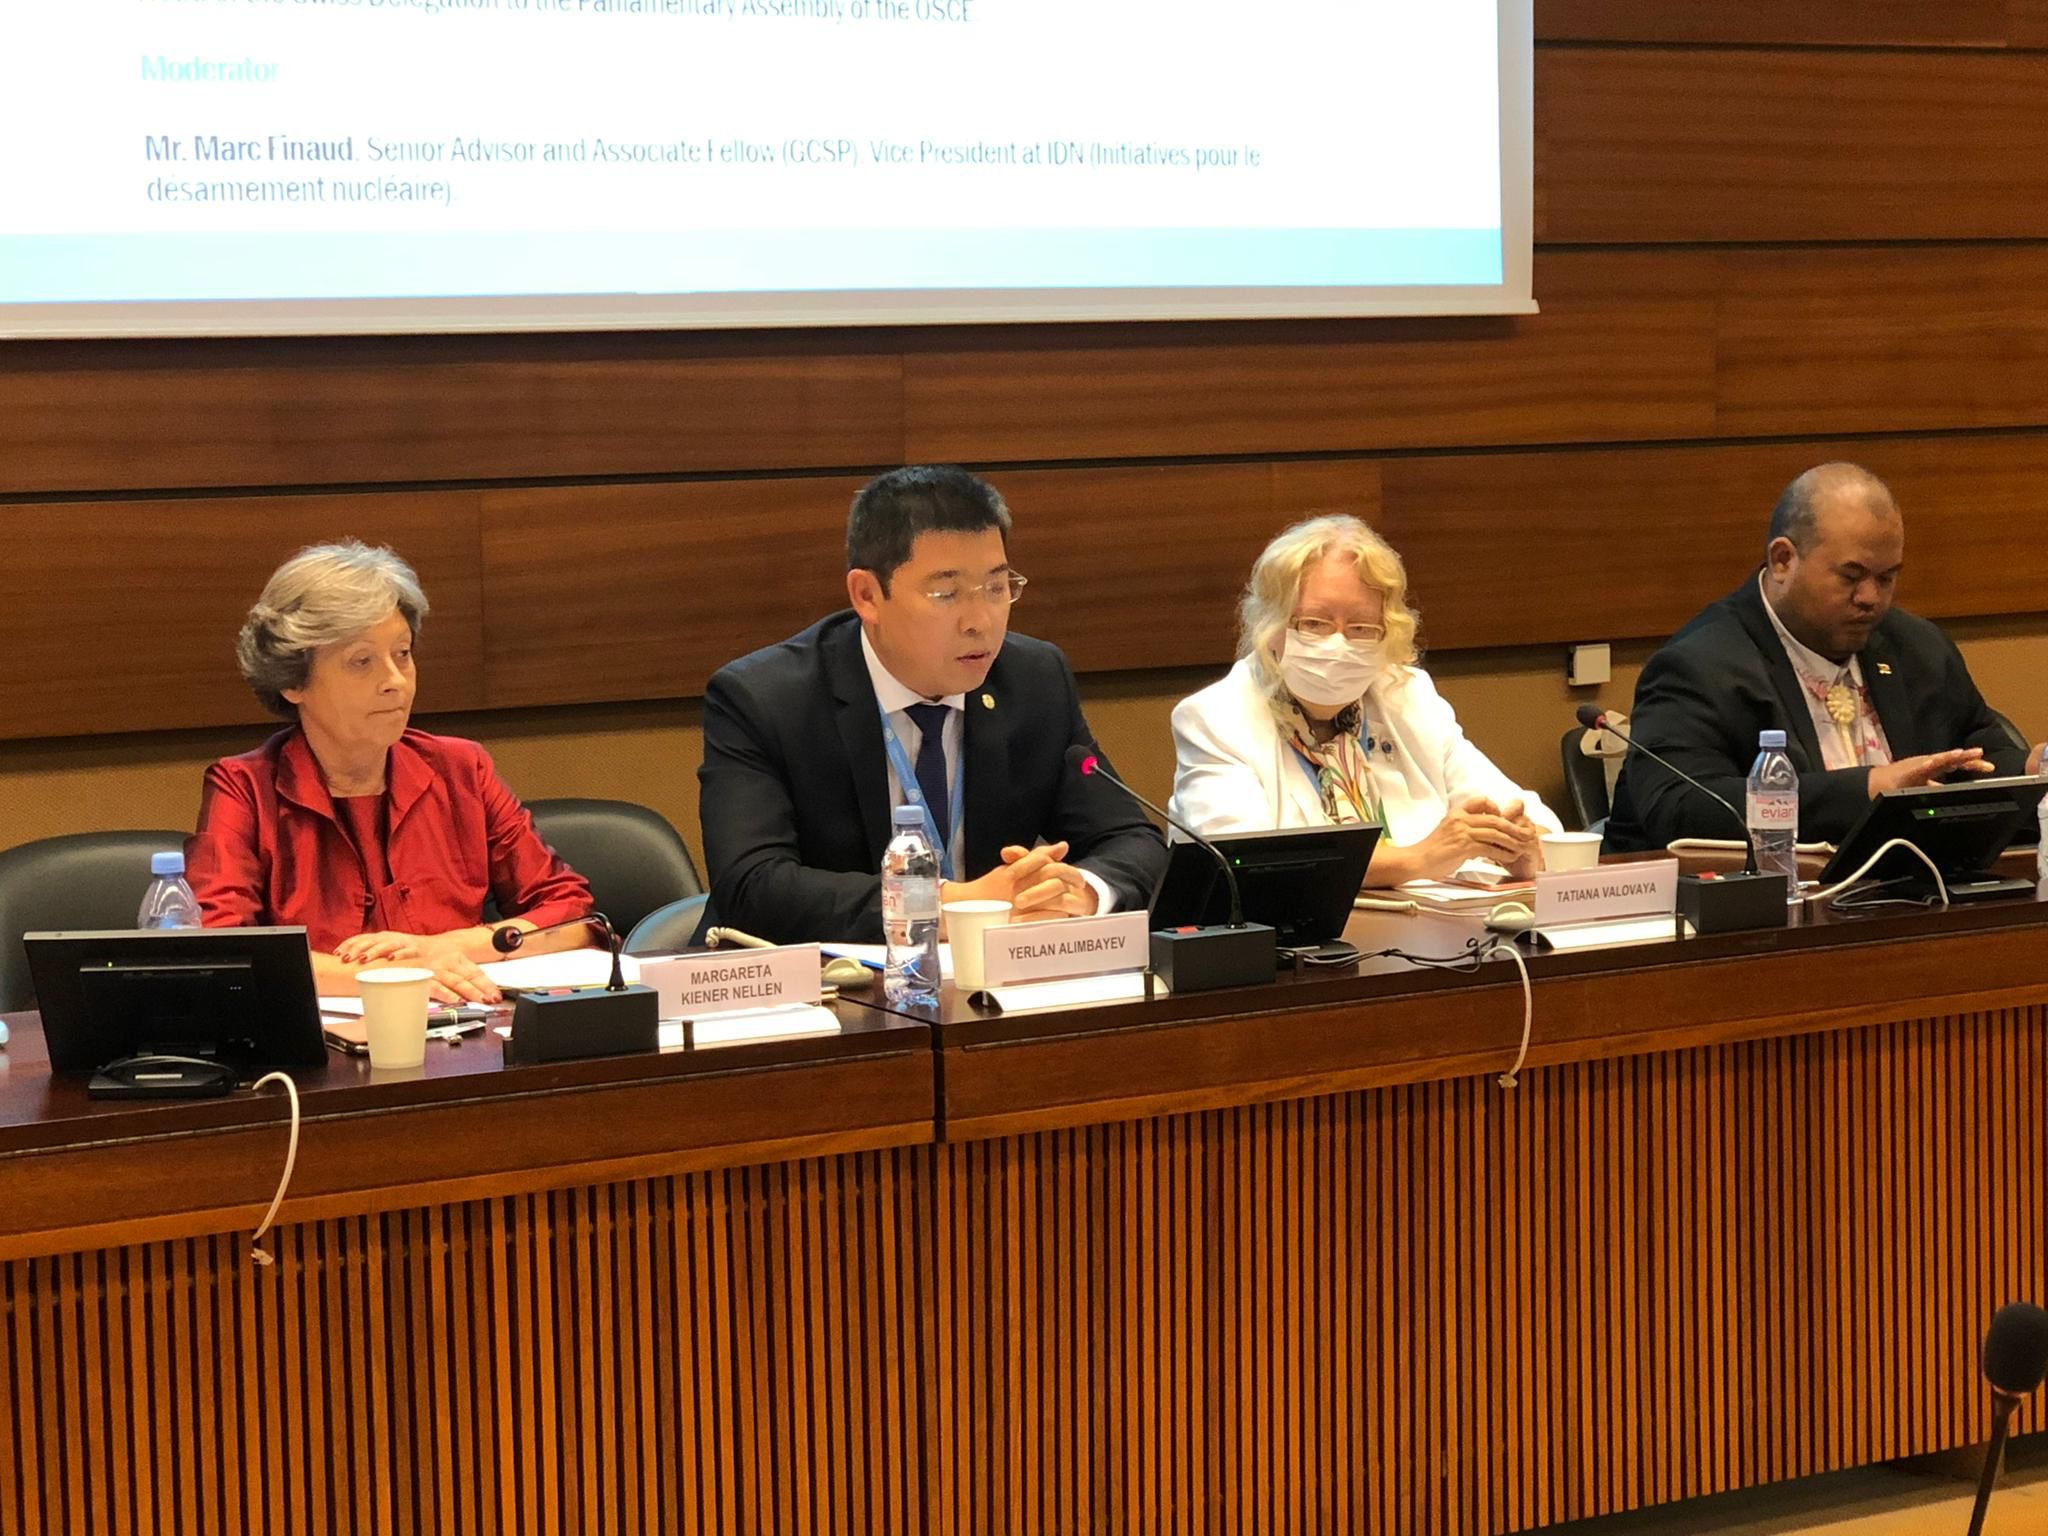 International Day against Nuclear Tests commemorated in Geneva